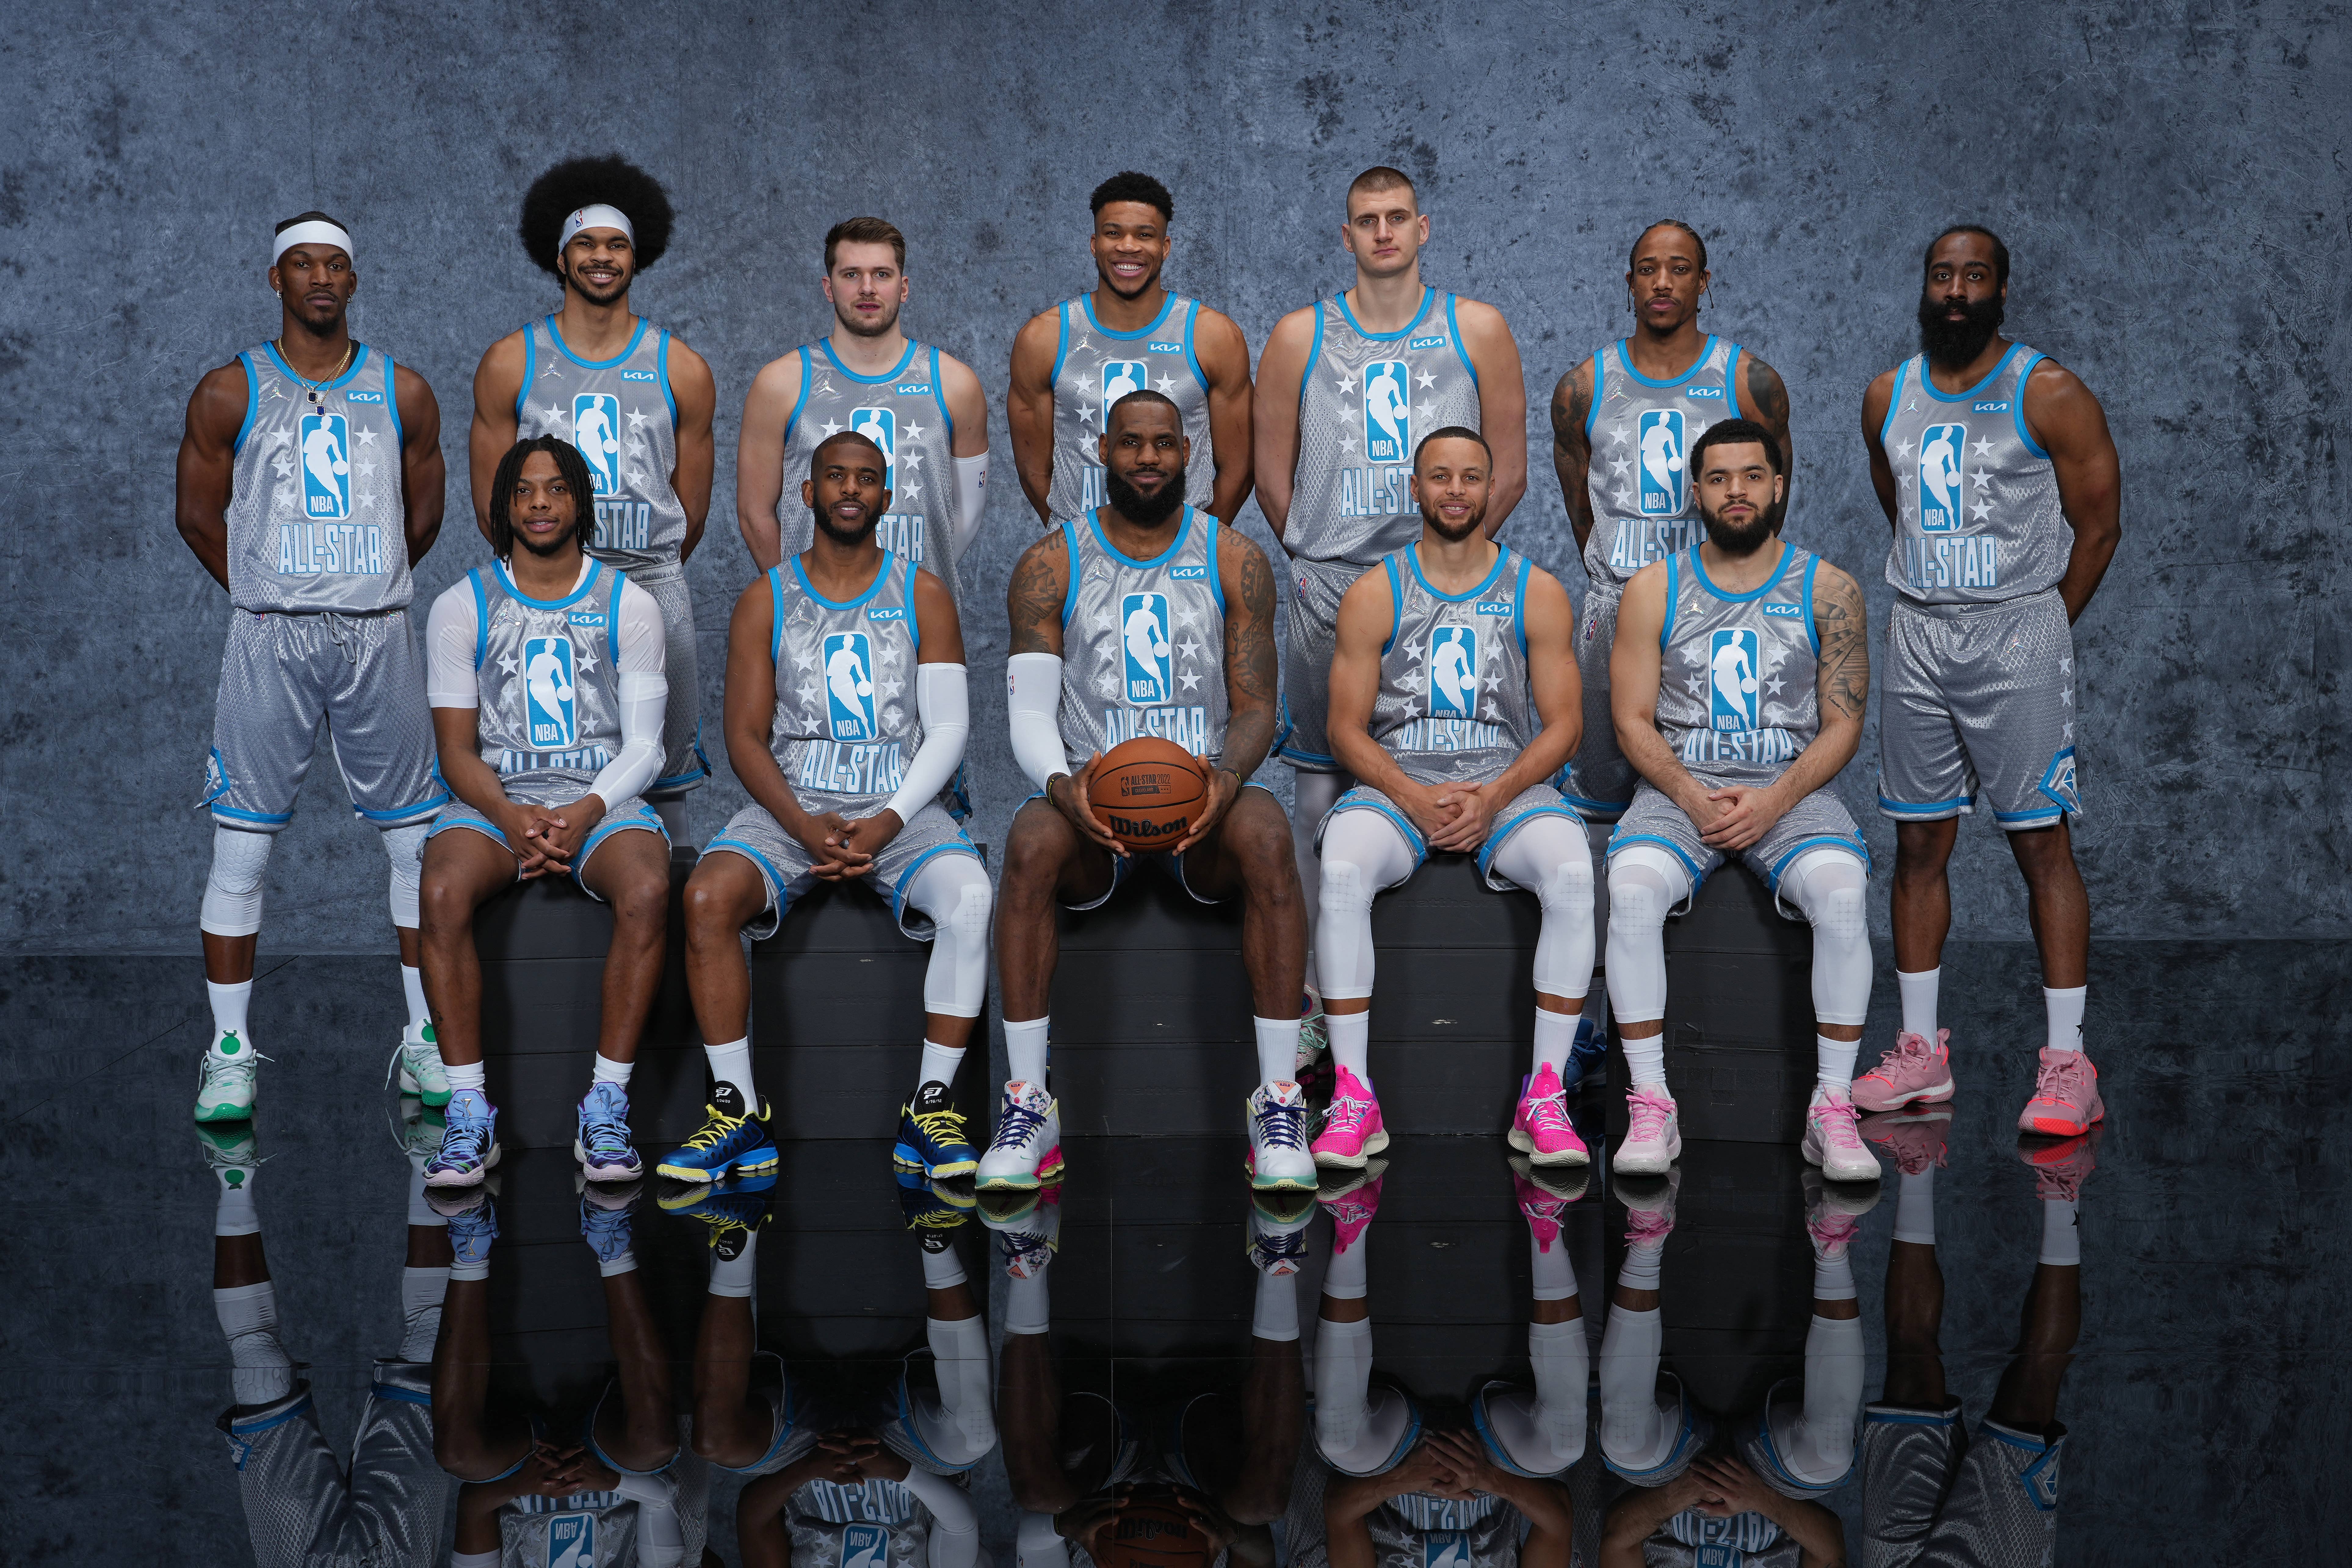 2022 NBA All-Star Game: Start time, players, how to watch and stream